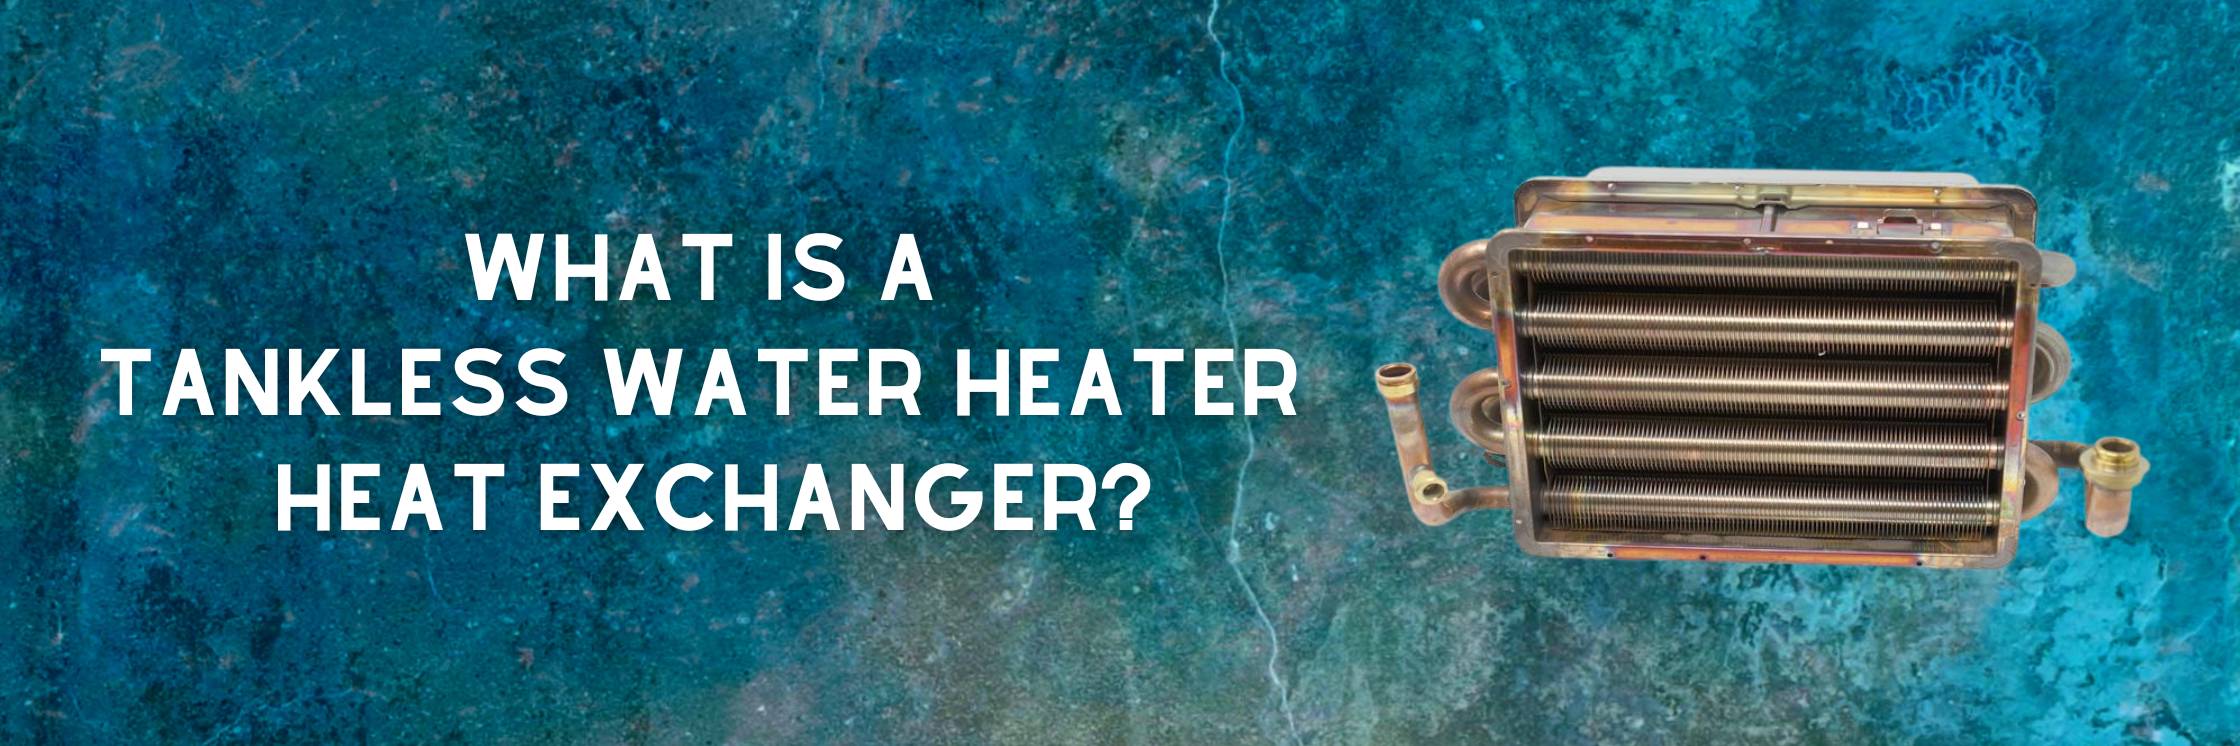 What is a Tankless Water Heater Heat Exchanger?